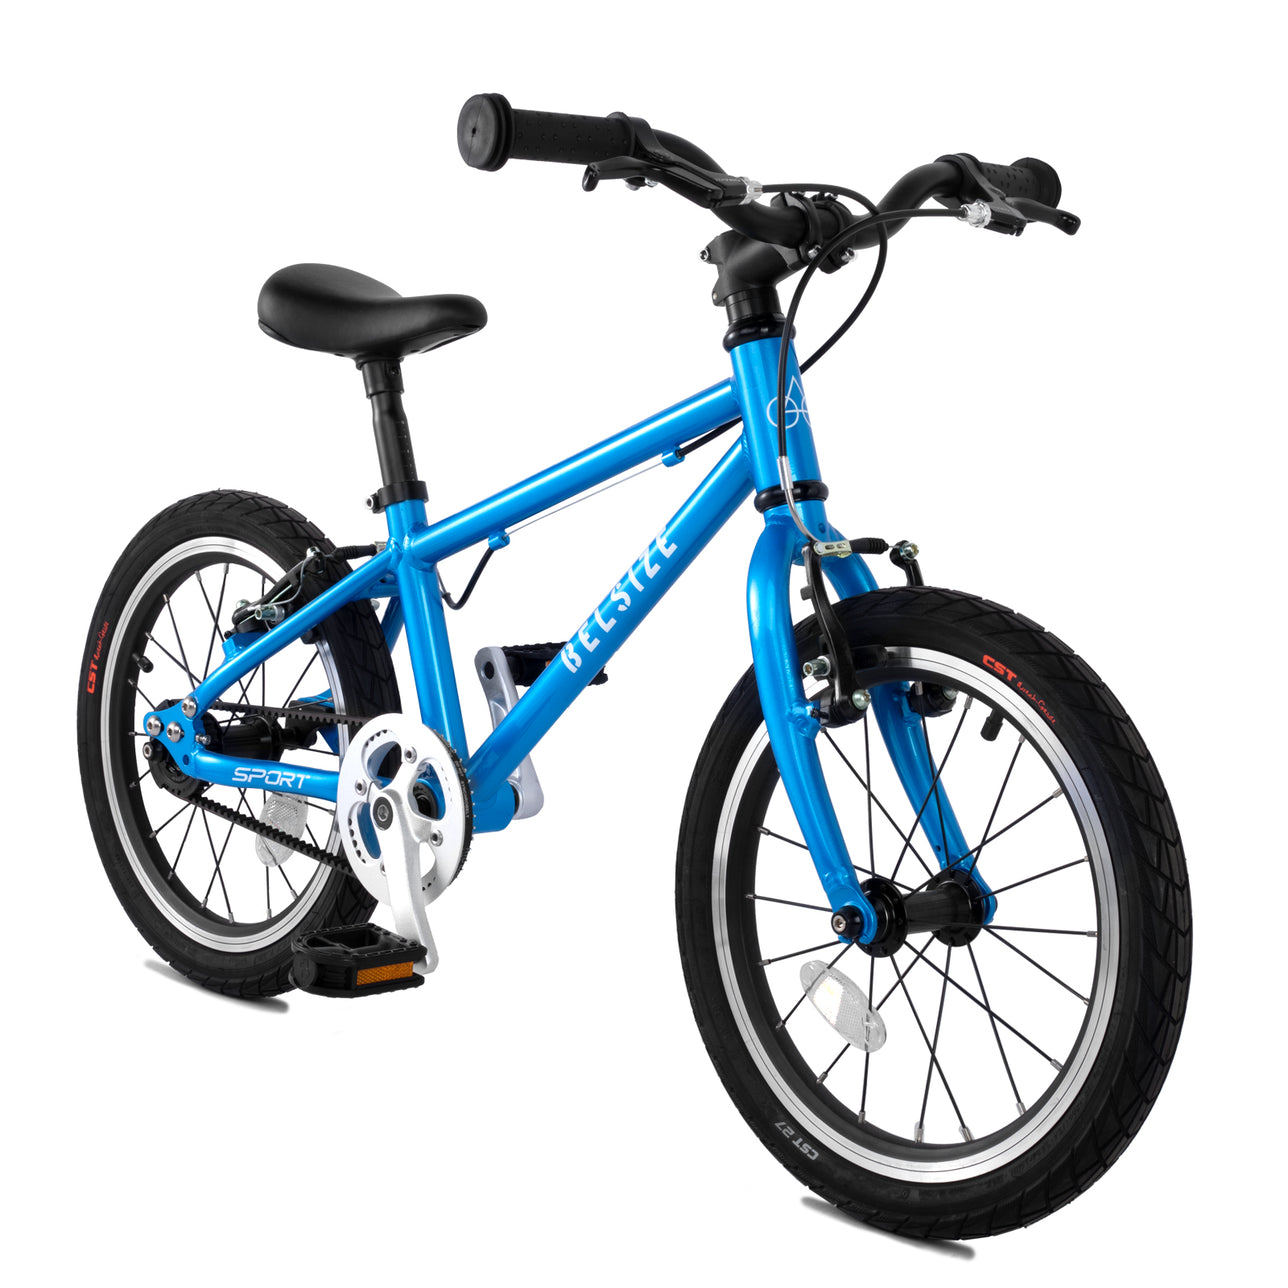 16-inch Sports Belt-Driven Kids' Bike - Belsize Official Blue Sporting Goods > Outdoor Recreation > Cycling > Bicycles